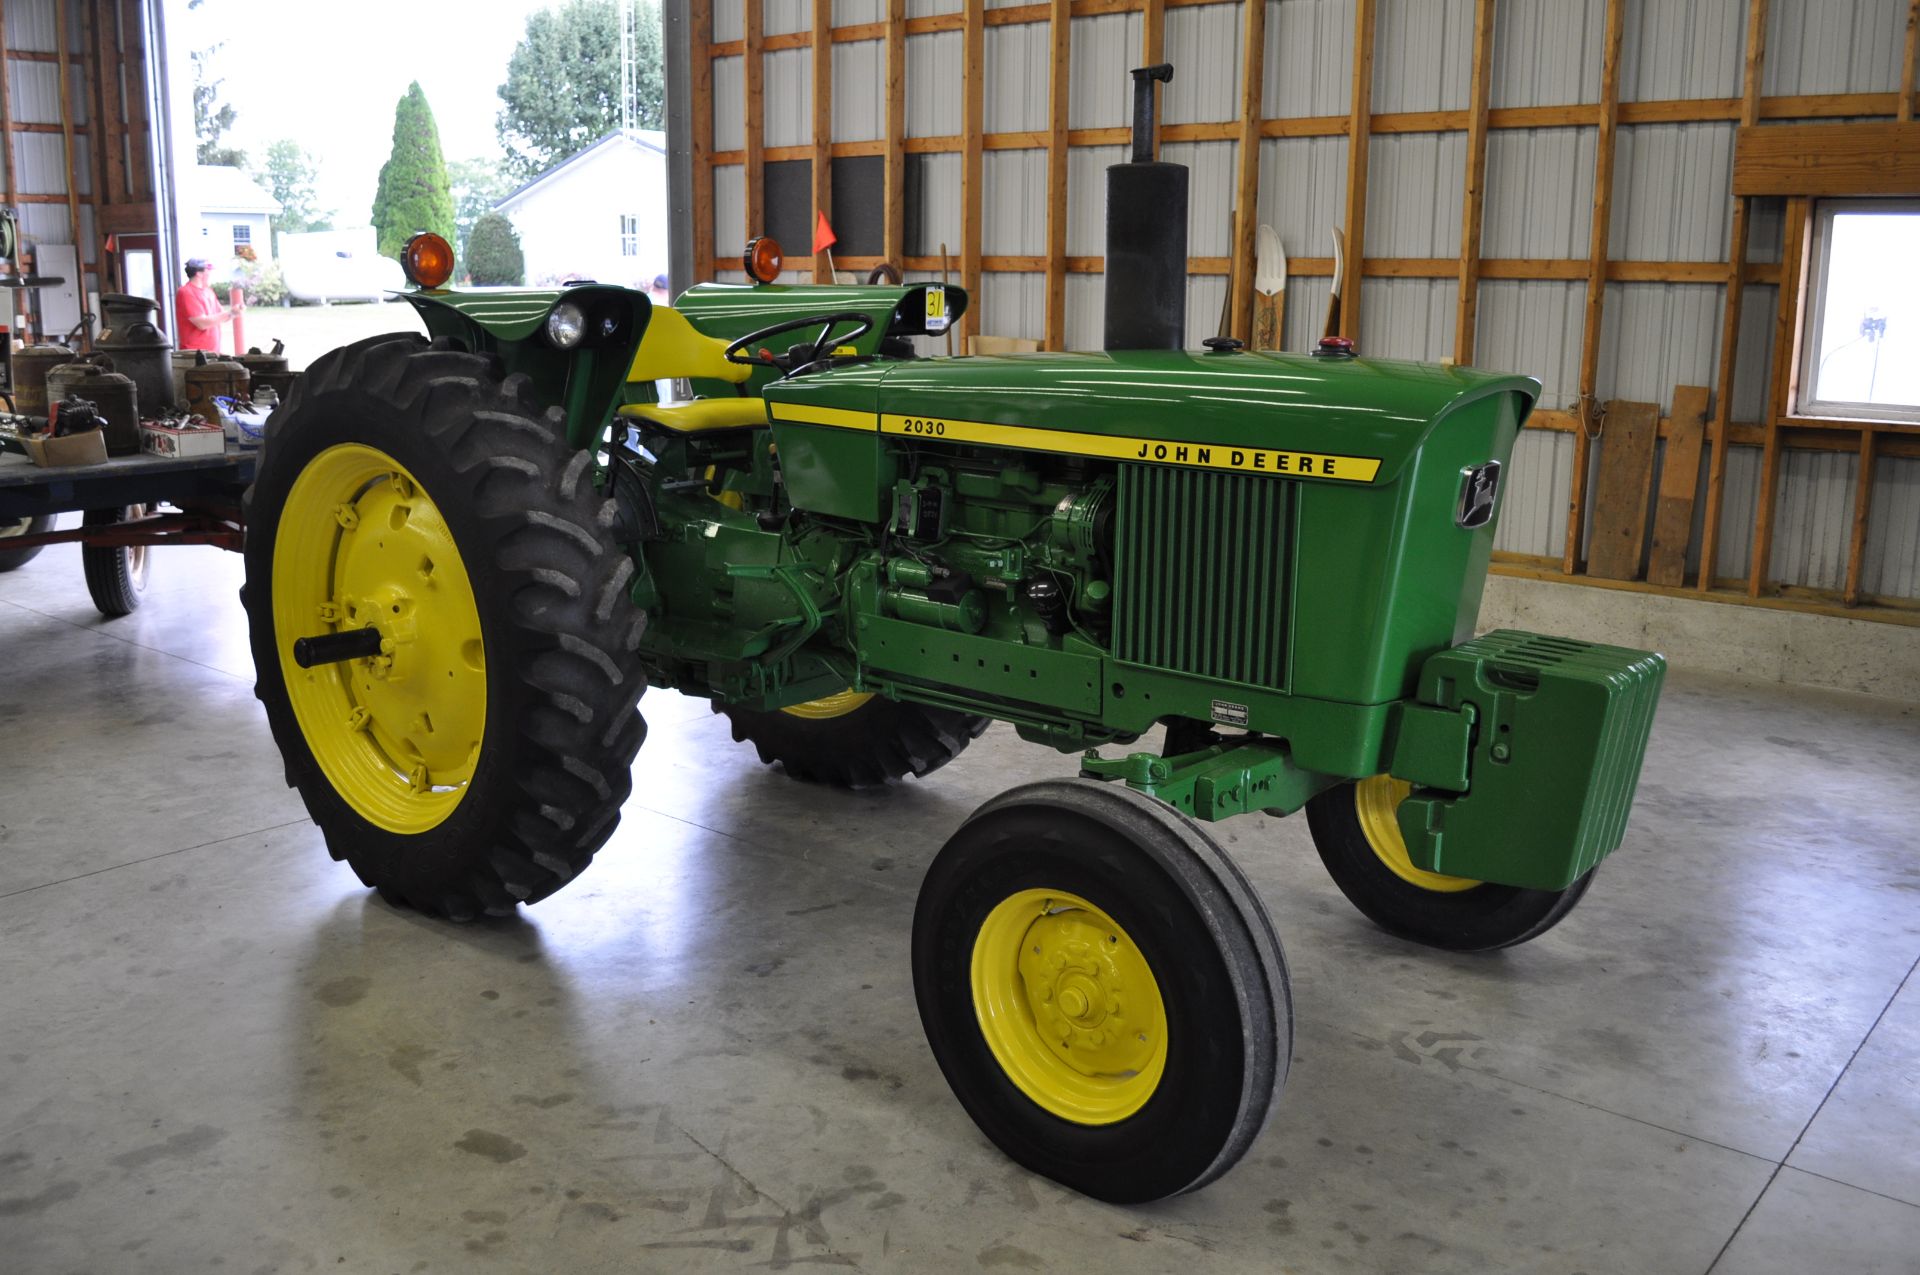 John Deere 2030 tractor, 13.6-38 rear, 7.5-16 front, front wts, 2 hyd remotes, 3 pt, quick hitch - Image 2 of 24